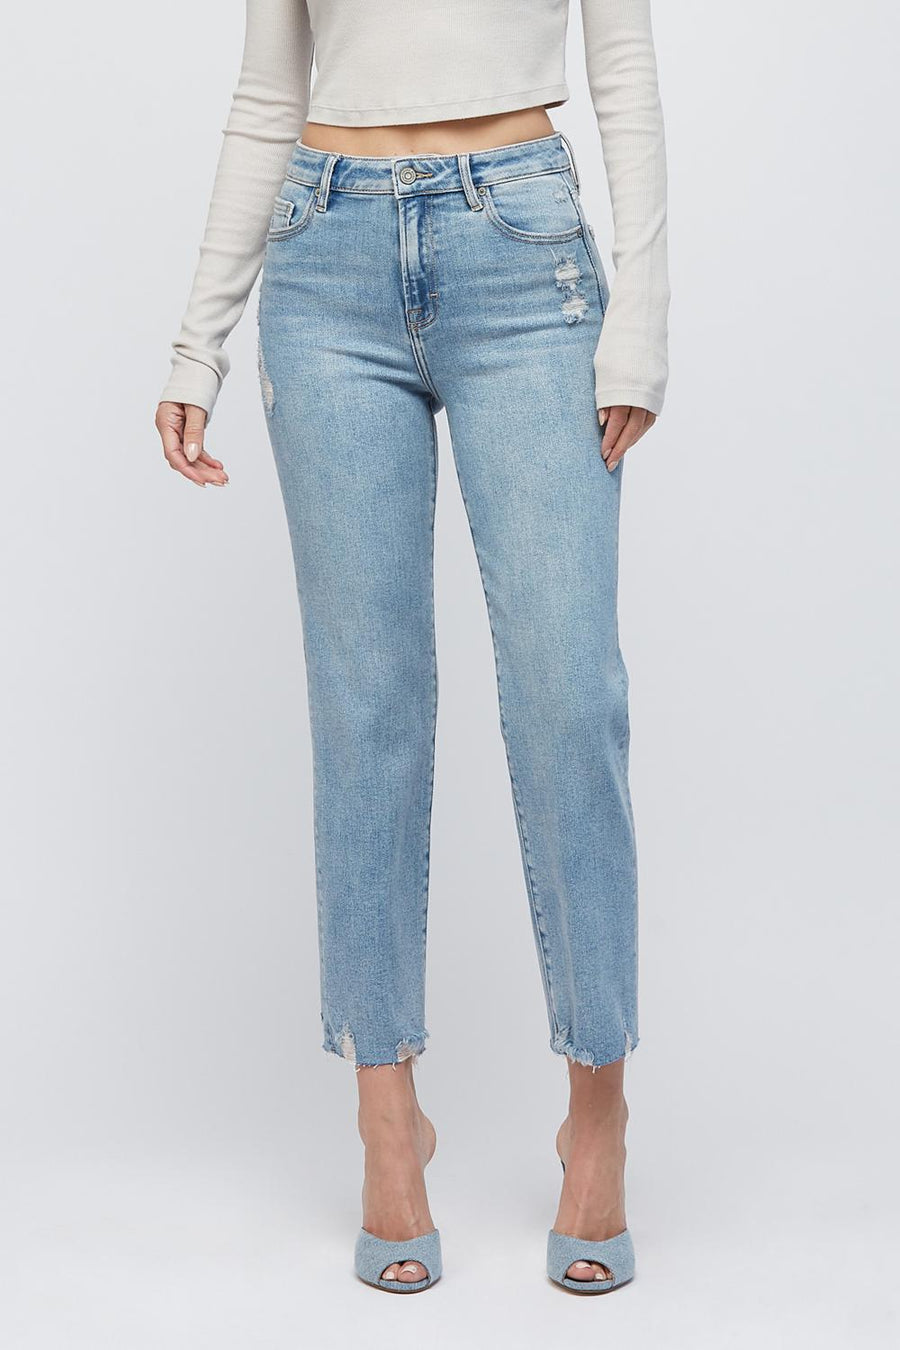 [TRACEY] MEDIUM LIGHT GRINDED CROPPED STRAIGHT